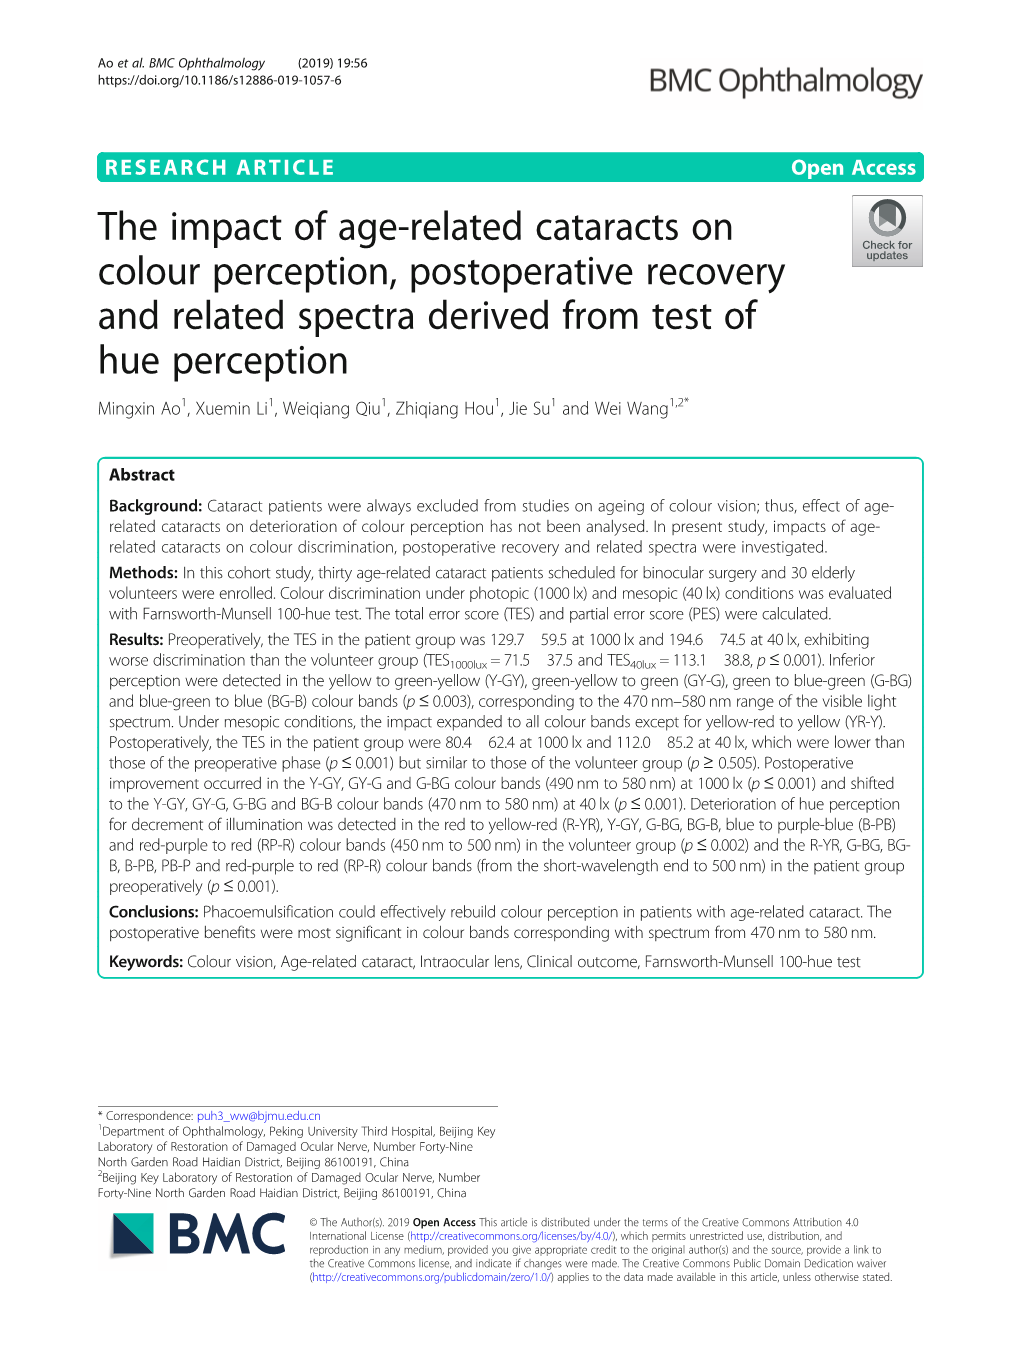 The Impact of Age-Related Cataracts on Colour Perception, Postoperative